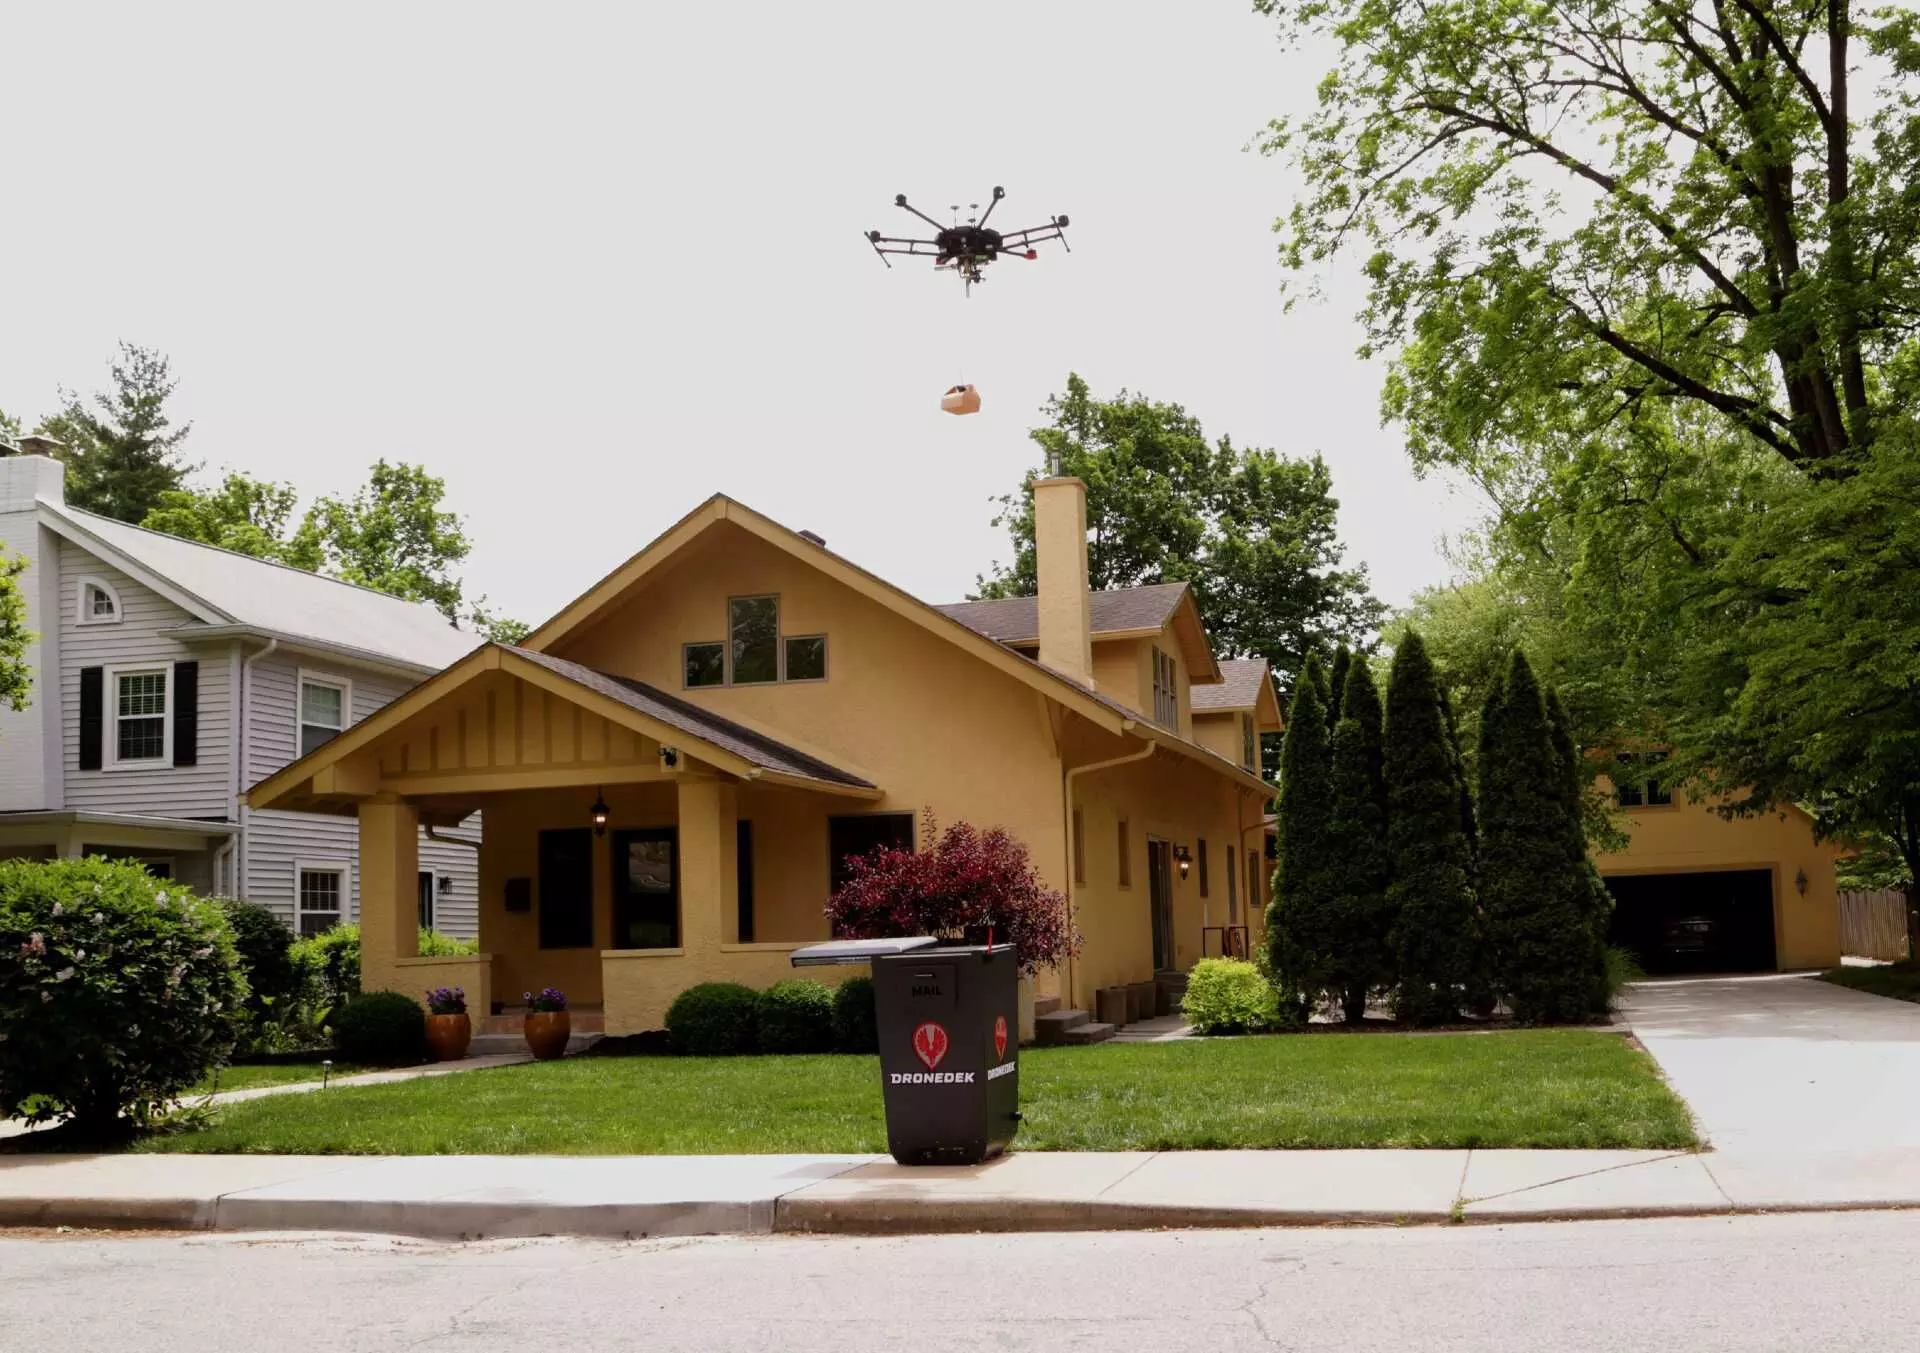 Dronedek looks to the future of delivery and sees autonomy